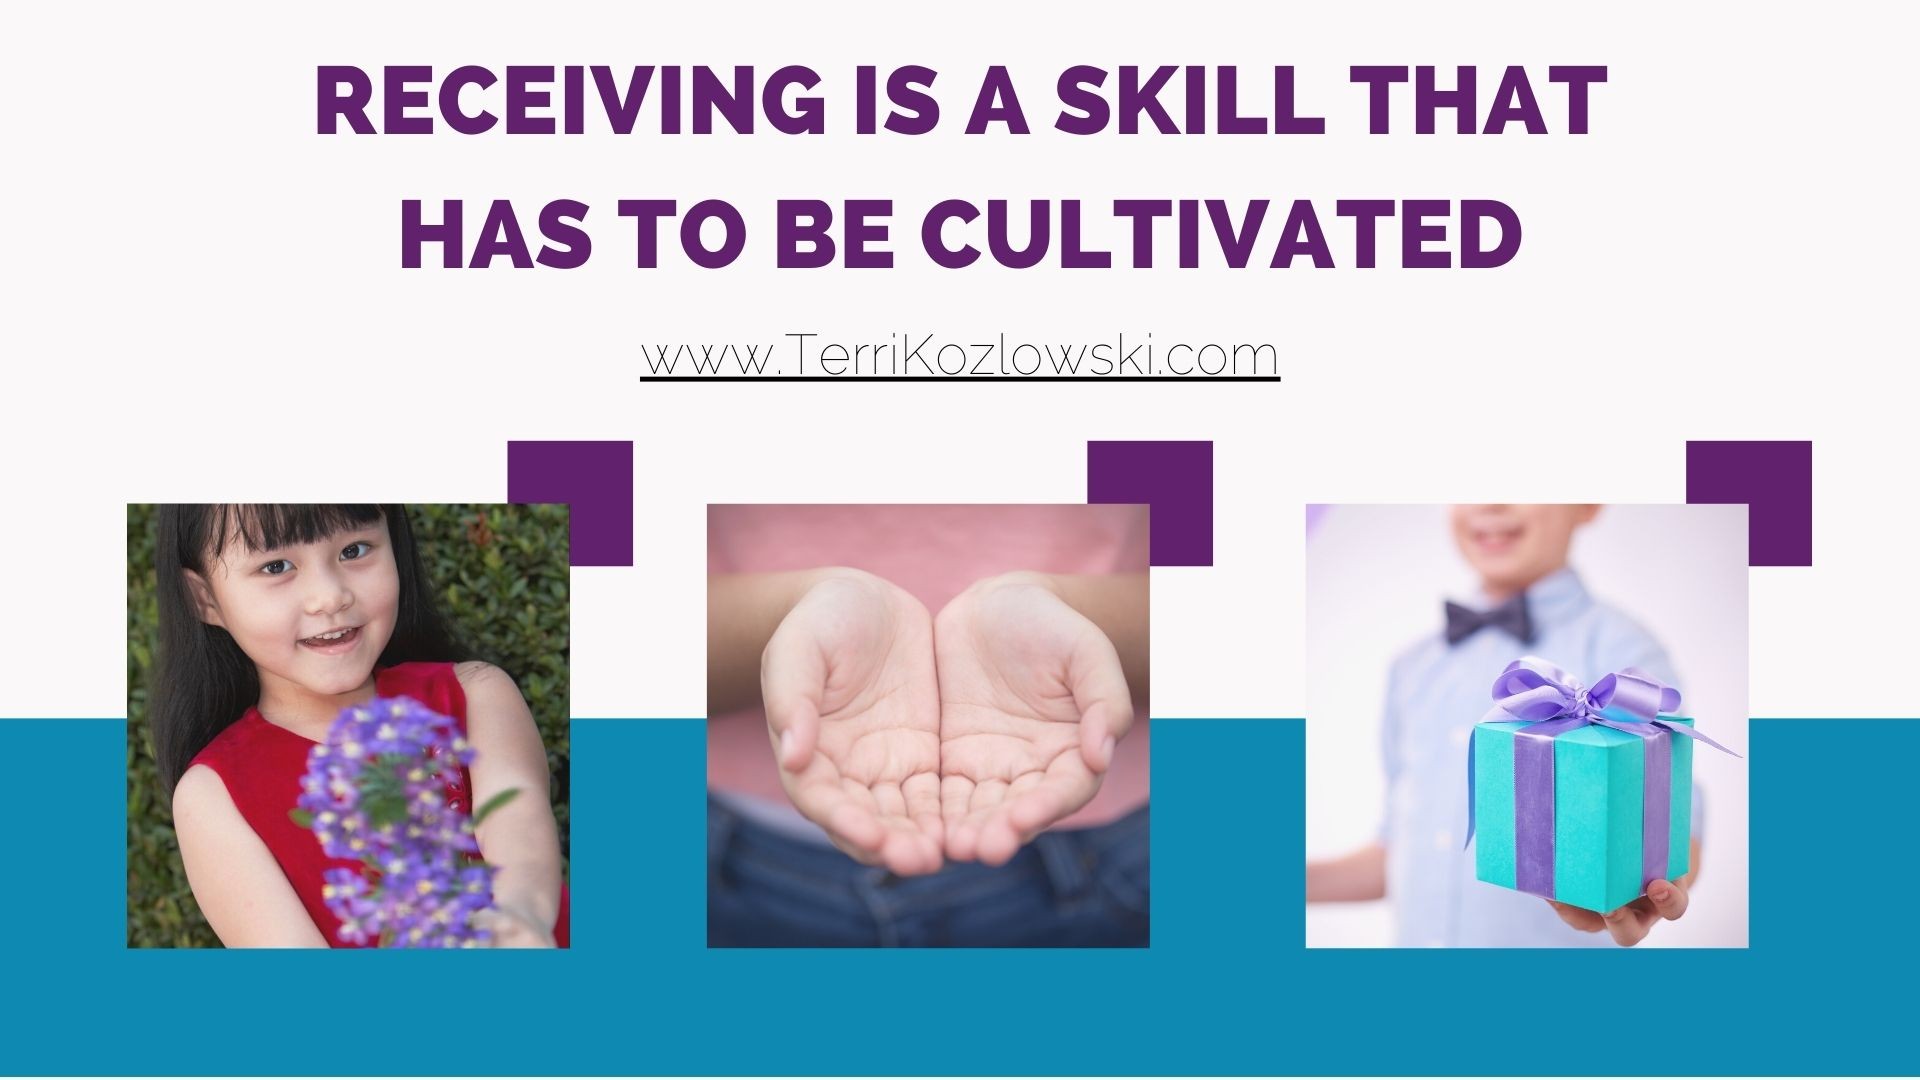 Receiving is a Skill that Has to be Cultivated